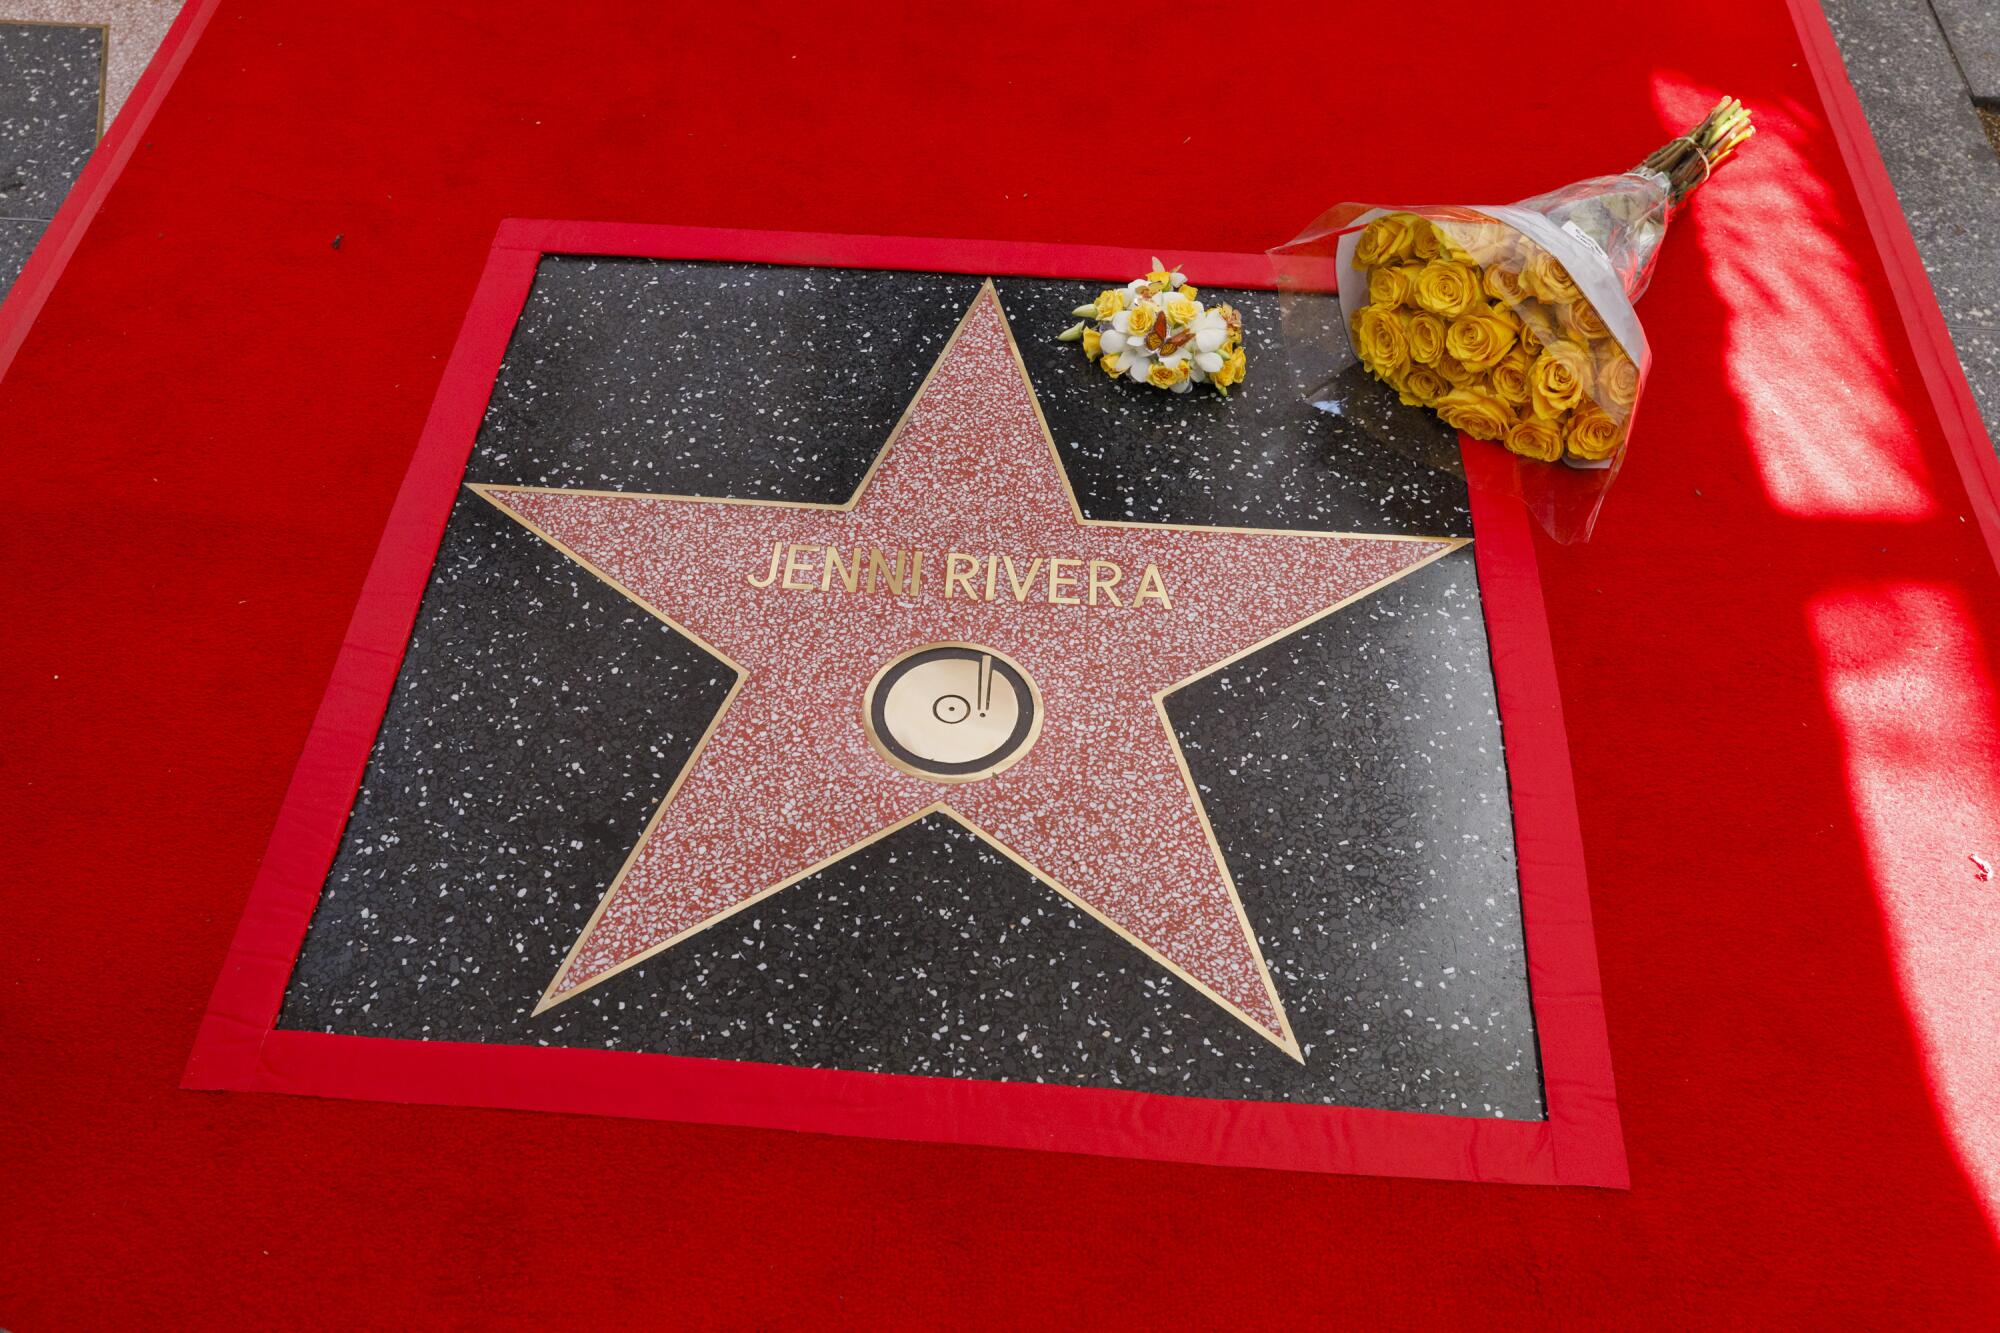 Flowers at the corner of Jenni Rivera's posthumous star on the Hollywood Walk of Fame